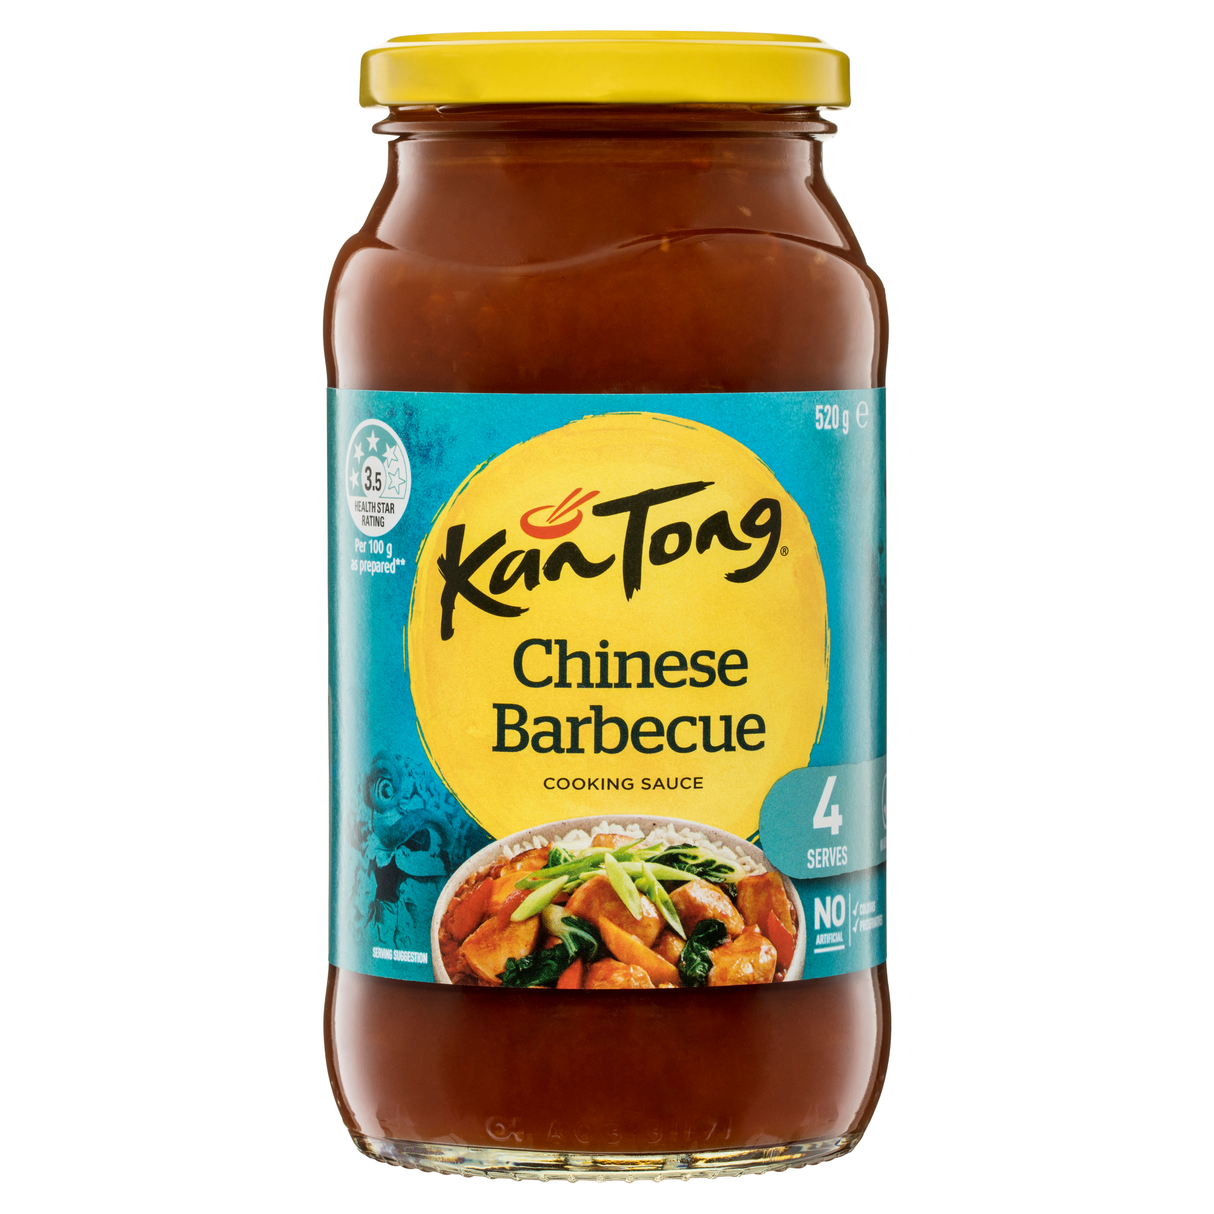 Kan Tong Chinese Barbecue Stir Fry Sauce 520g